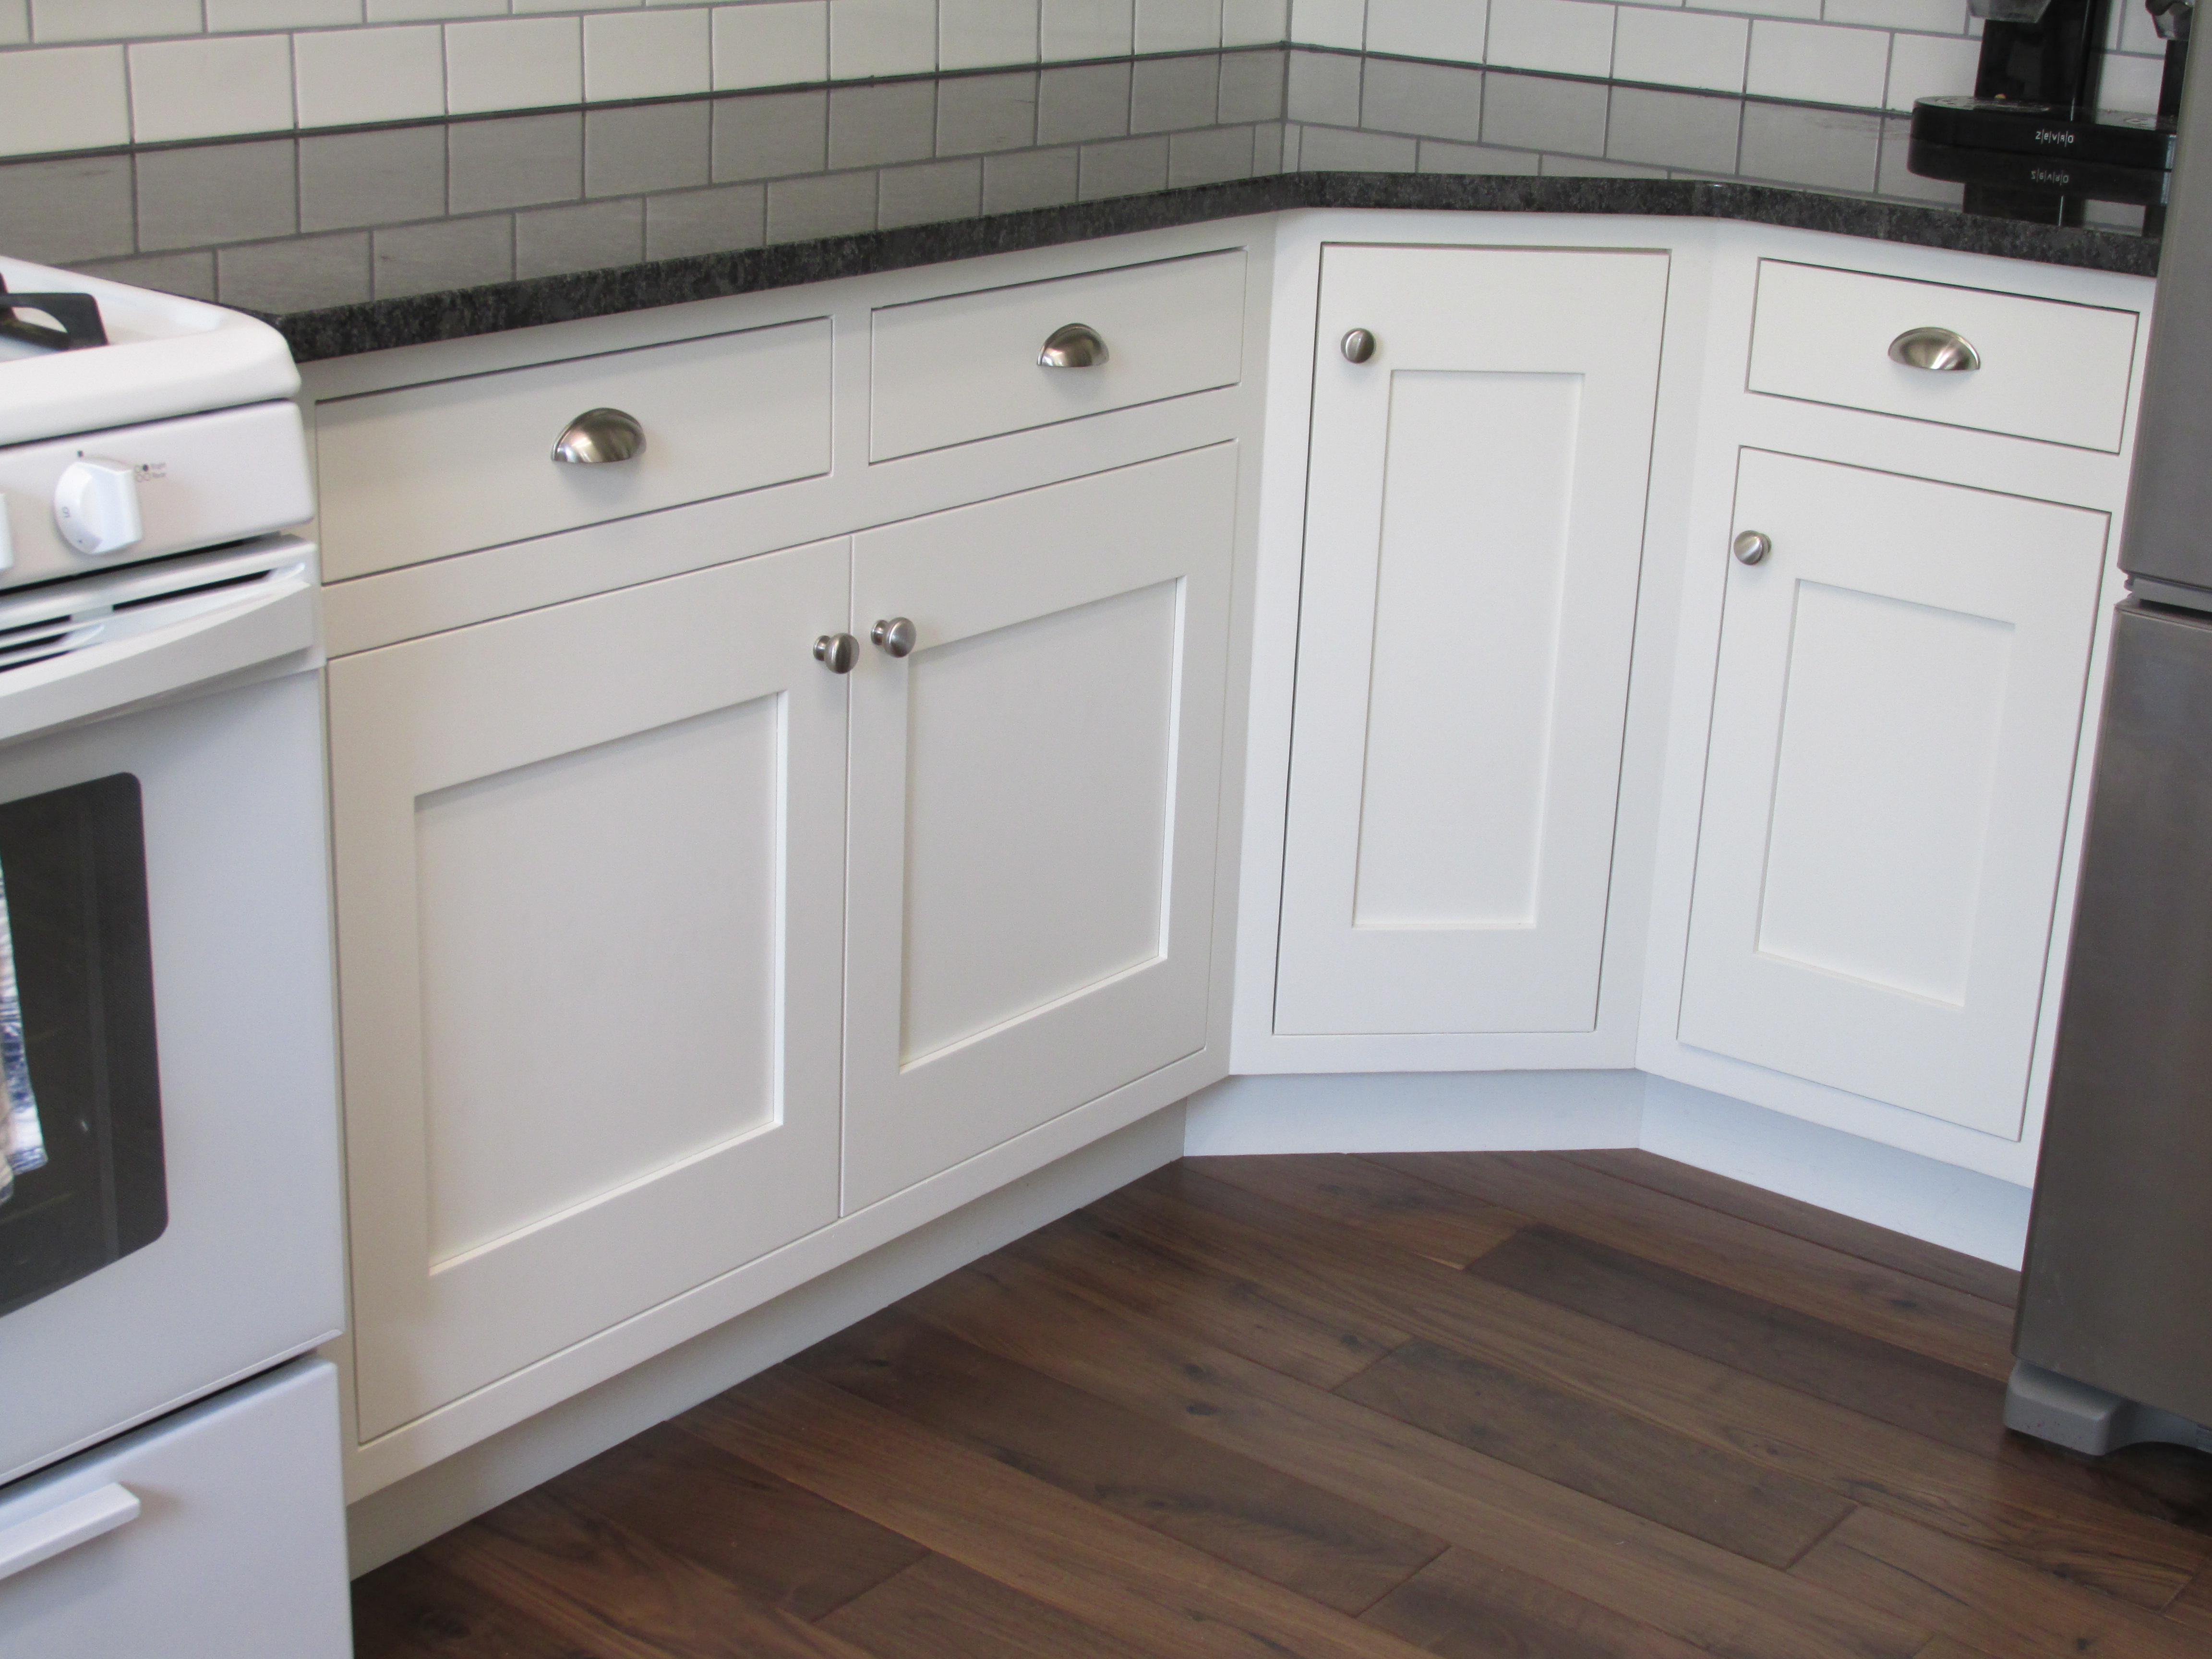 Kitchen Makeover From Partial Overlay To Inset